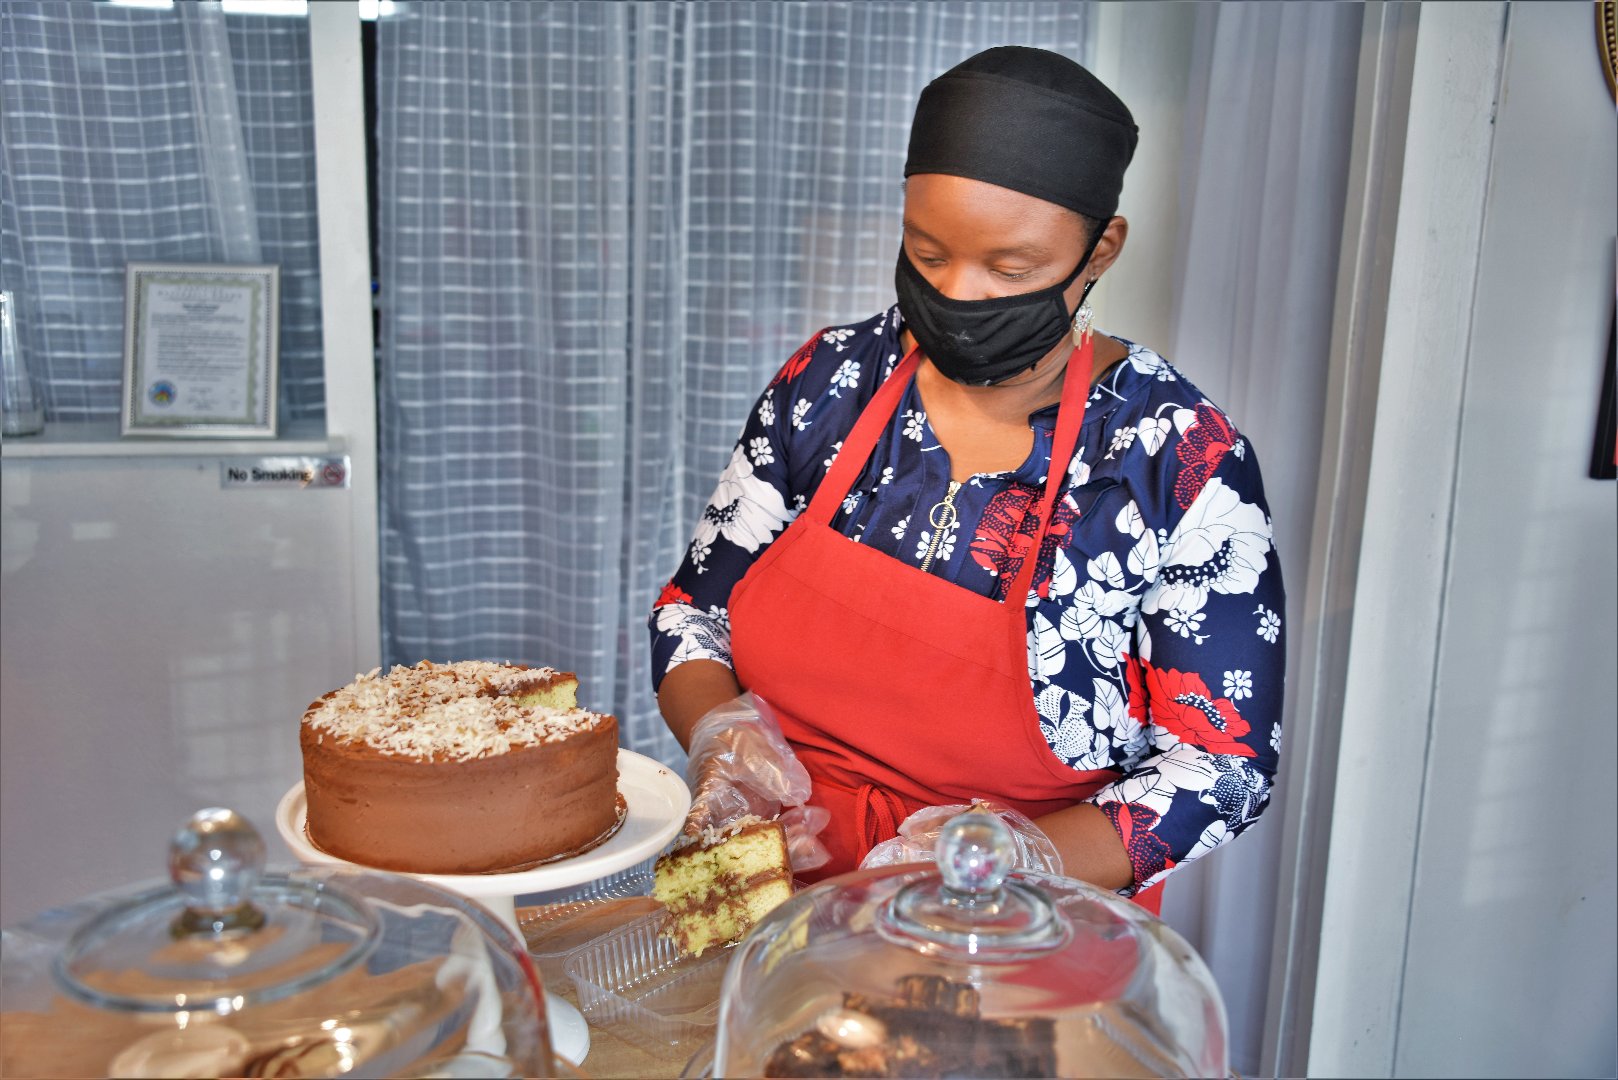 Dr. Hamidah Sharif, owner of Sweet Valley Bakery and Farmstand, cuts a slice of sugar-free cake for a customer.